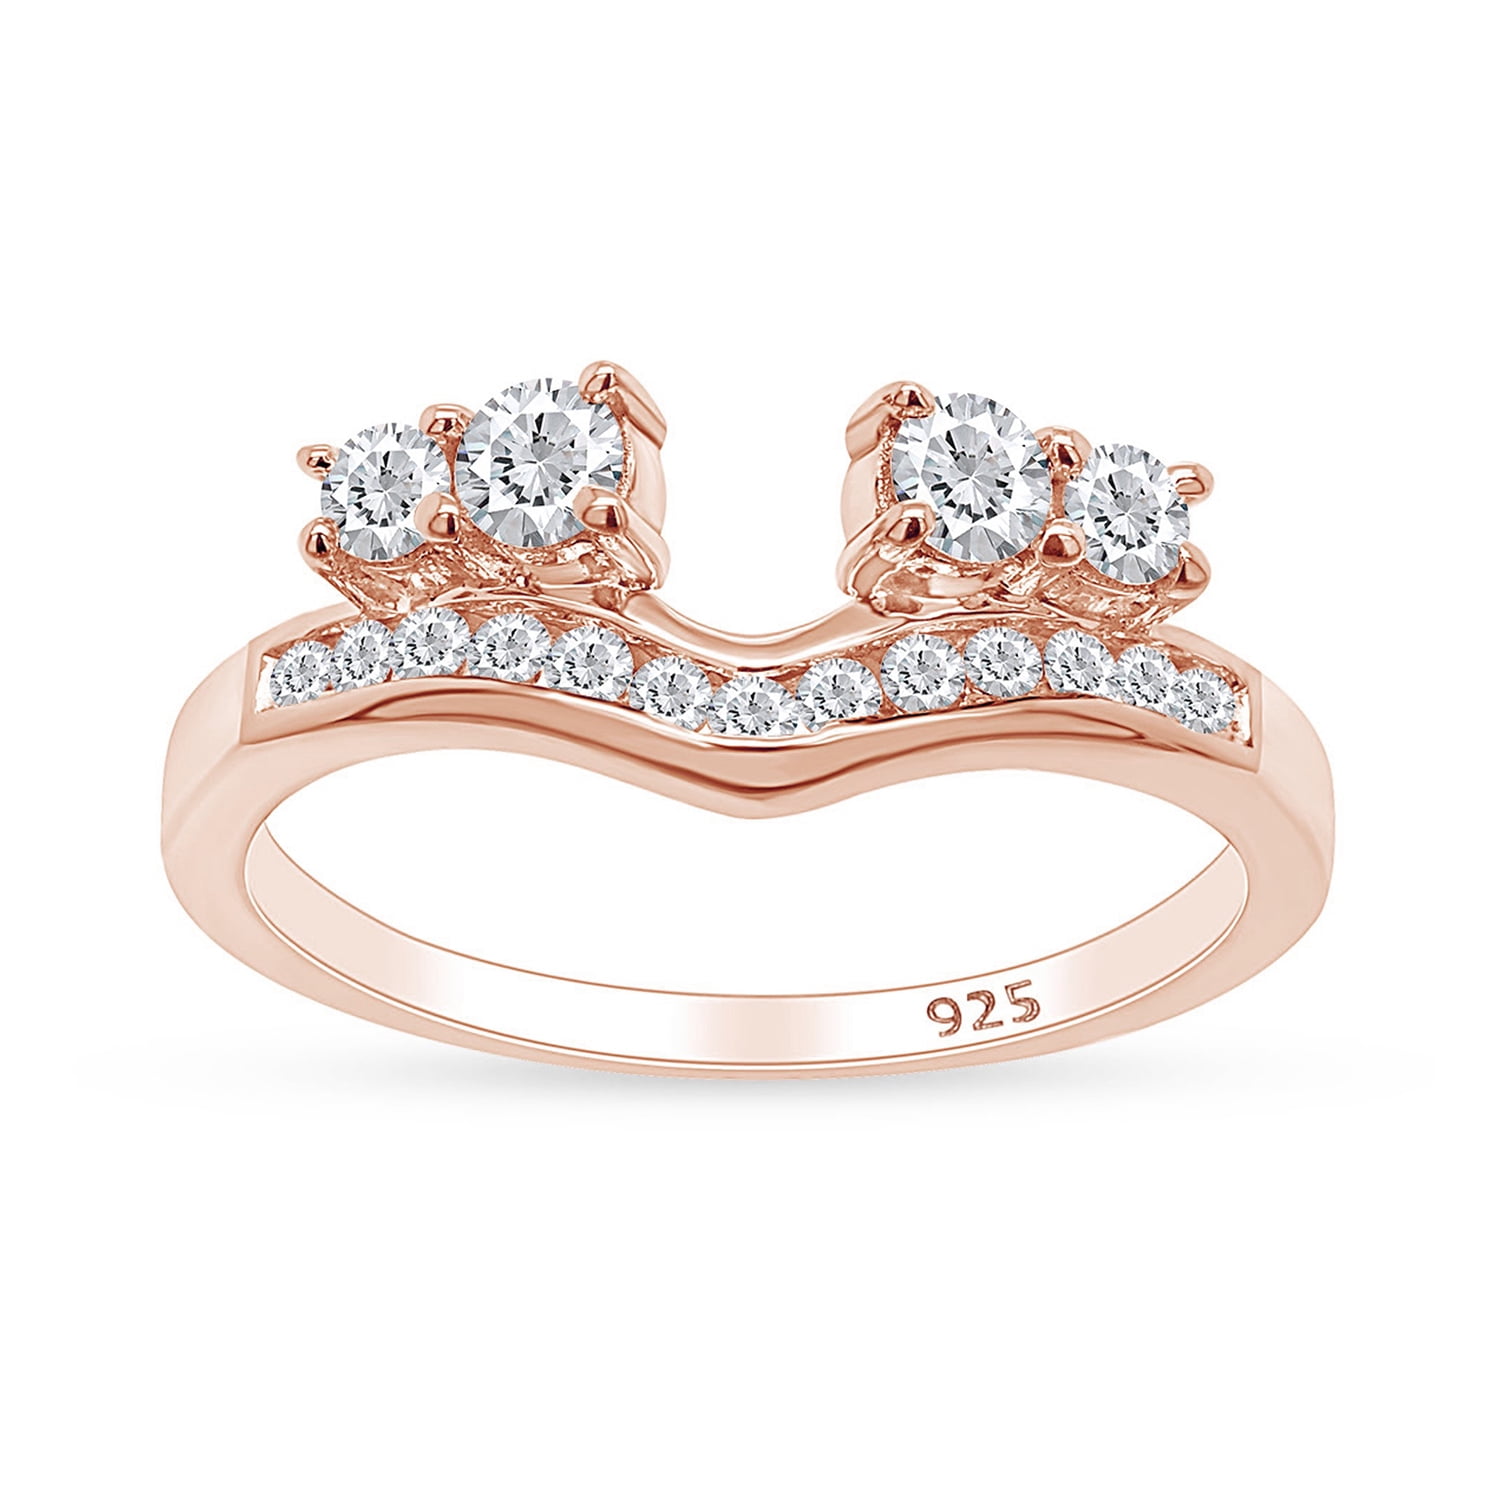 Baguette and Round Diamond Engagement Ring Guard | Shane Co.